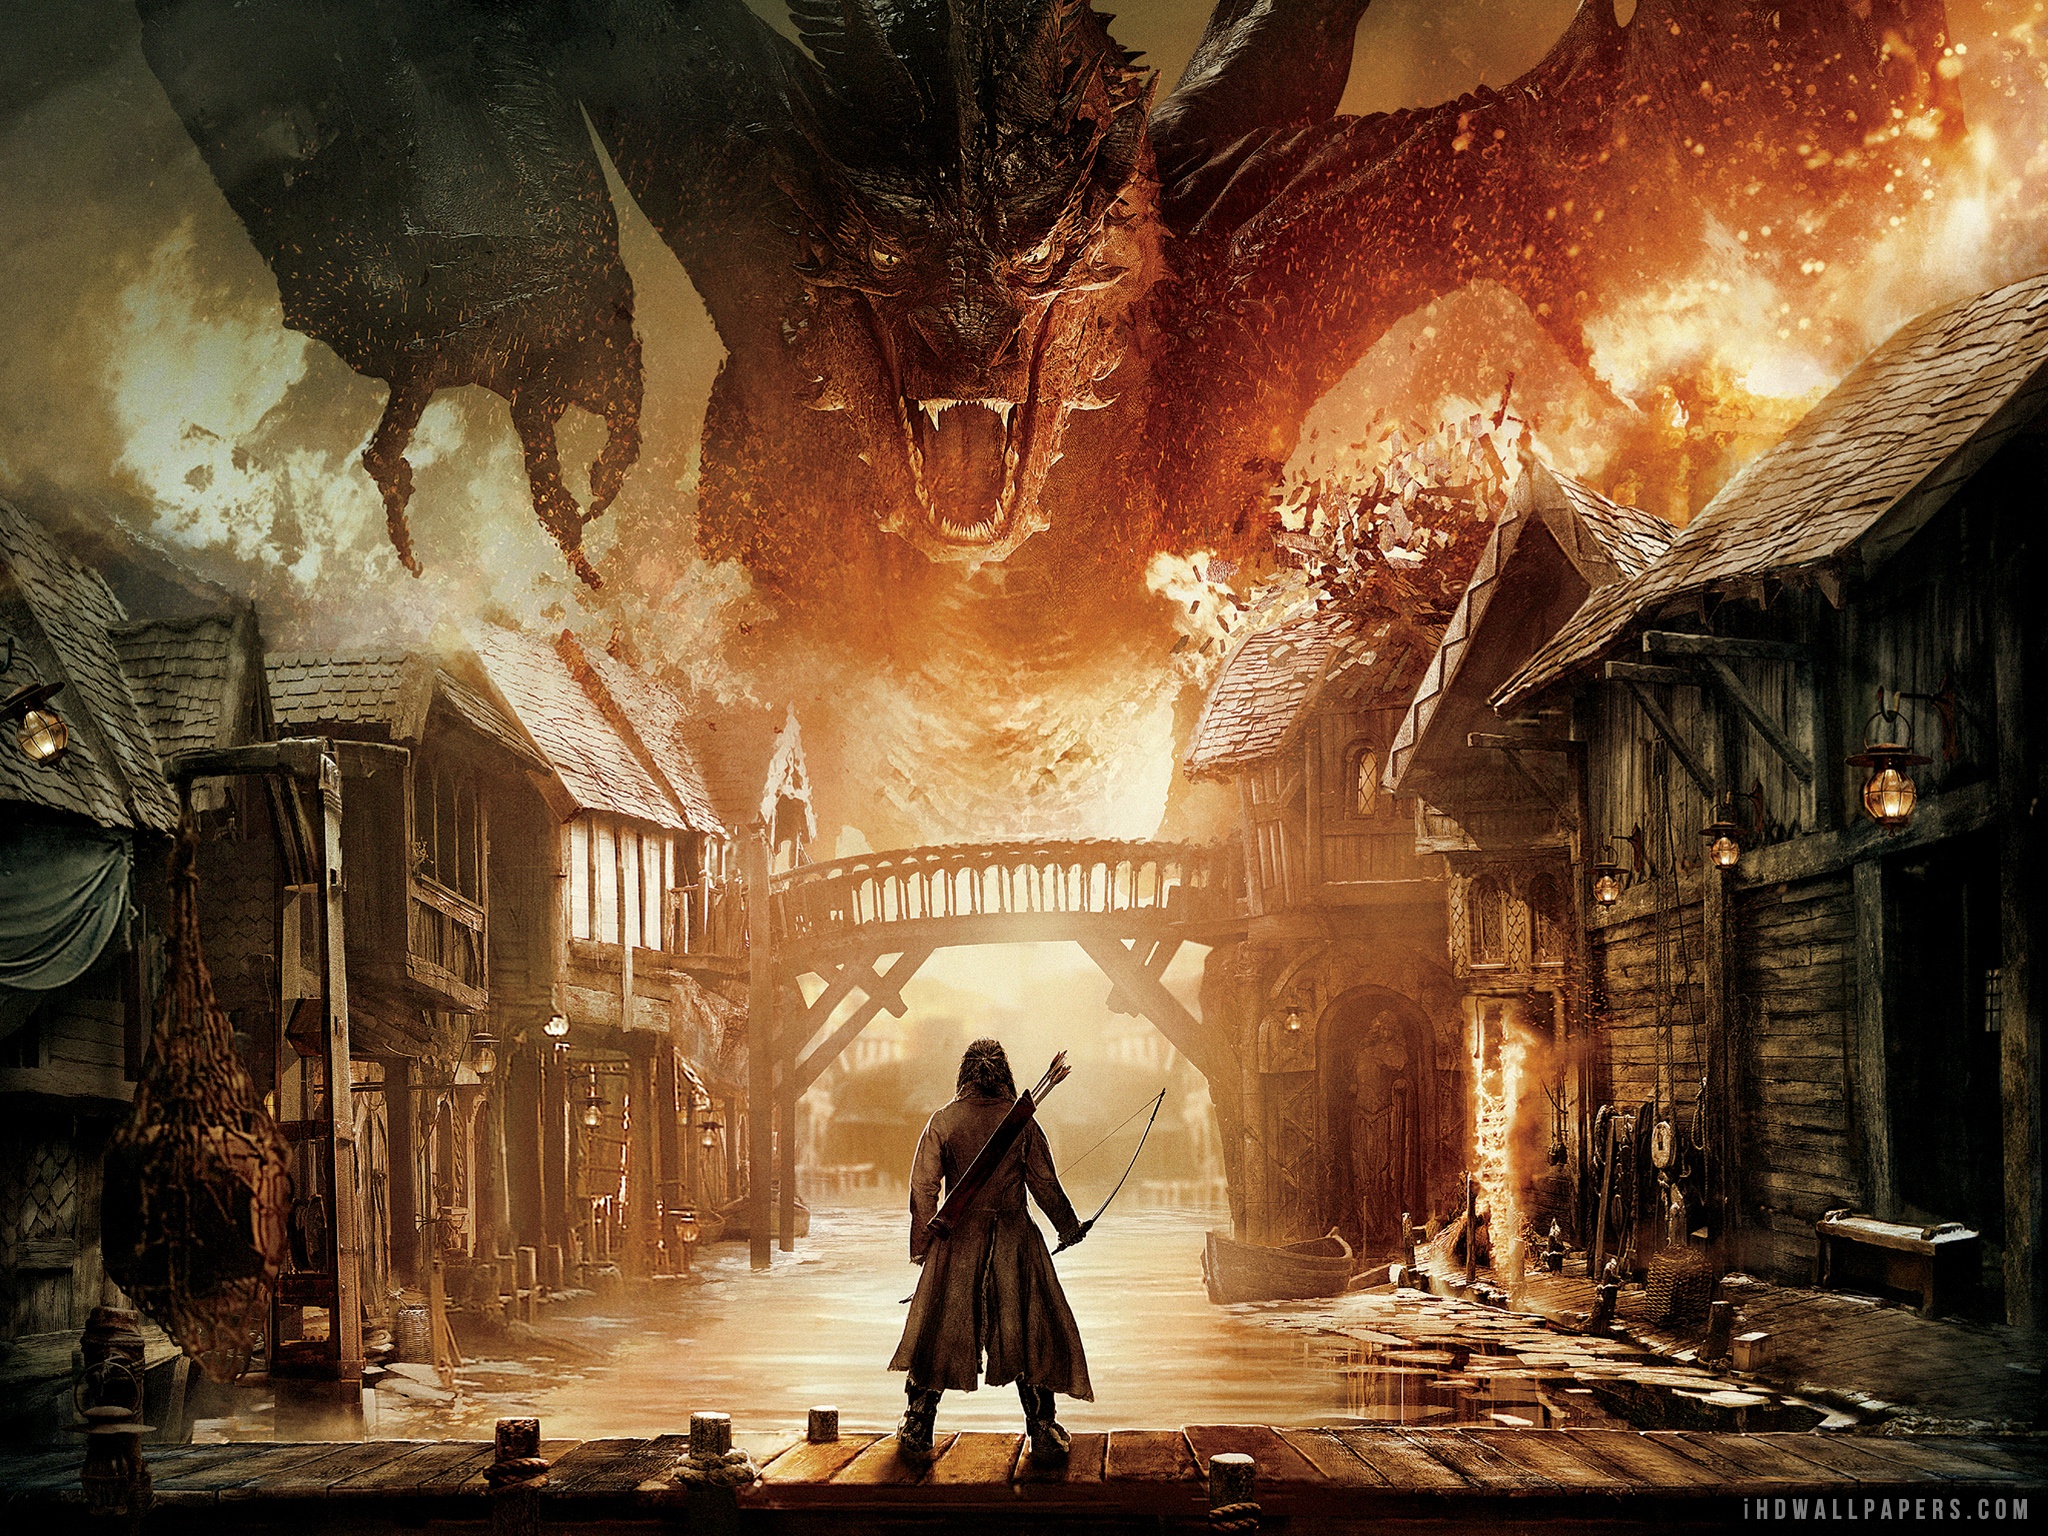 The Hobbit The Battle of the Five Armies HD Wallpaper - iHD Wallpapers